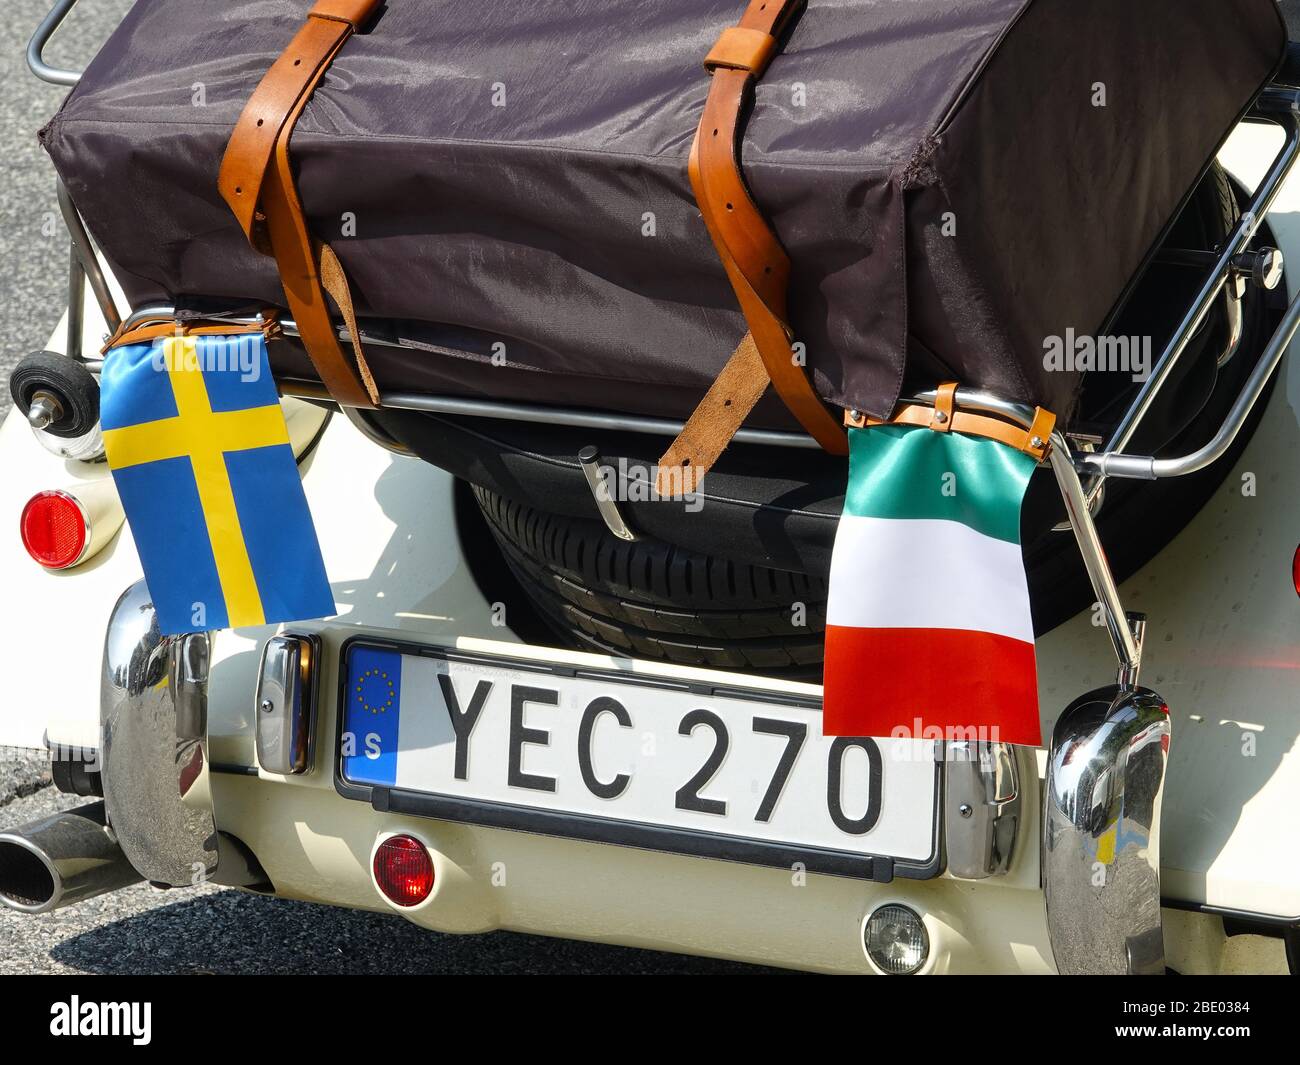 Suitcase loaded on rear pannier of a sportscar ready for travelling around the Swiss alps Stock Photo